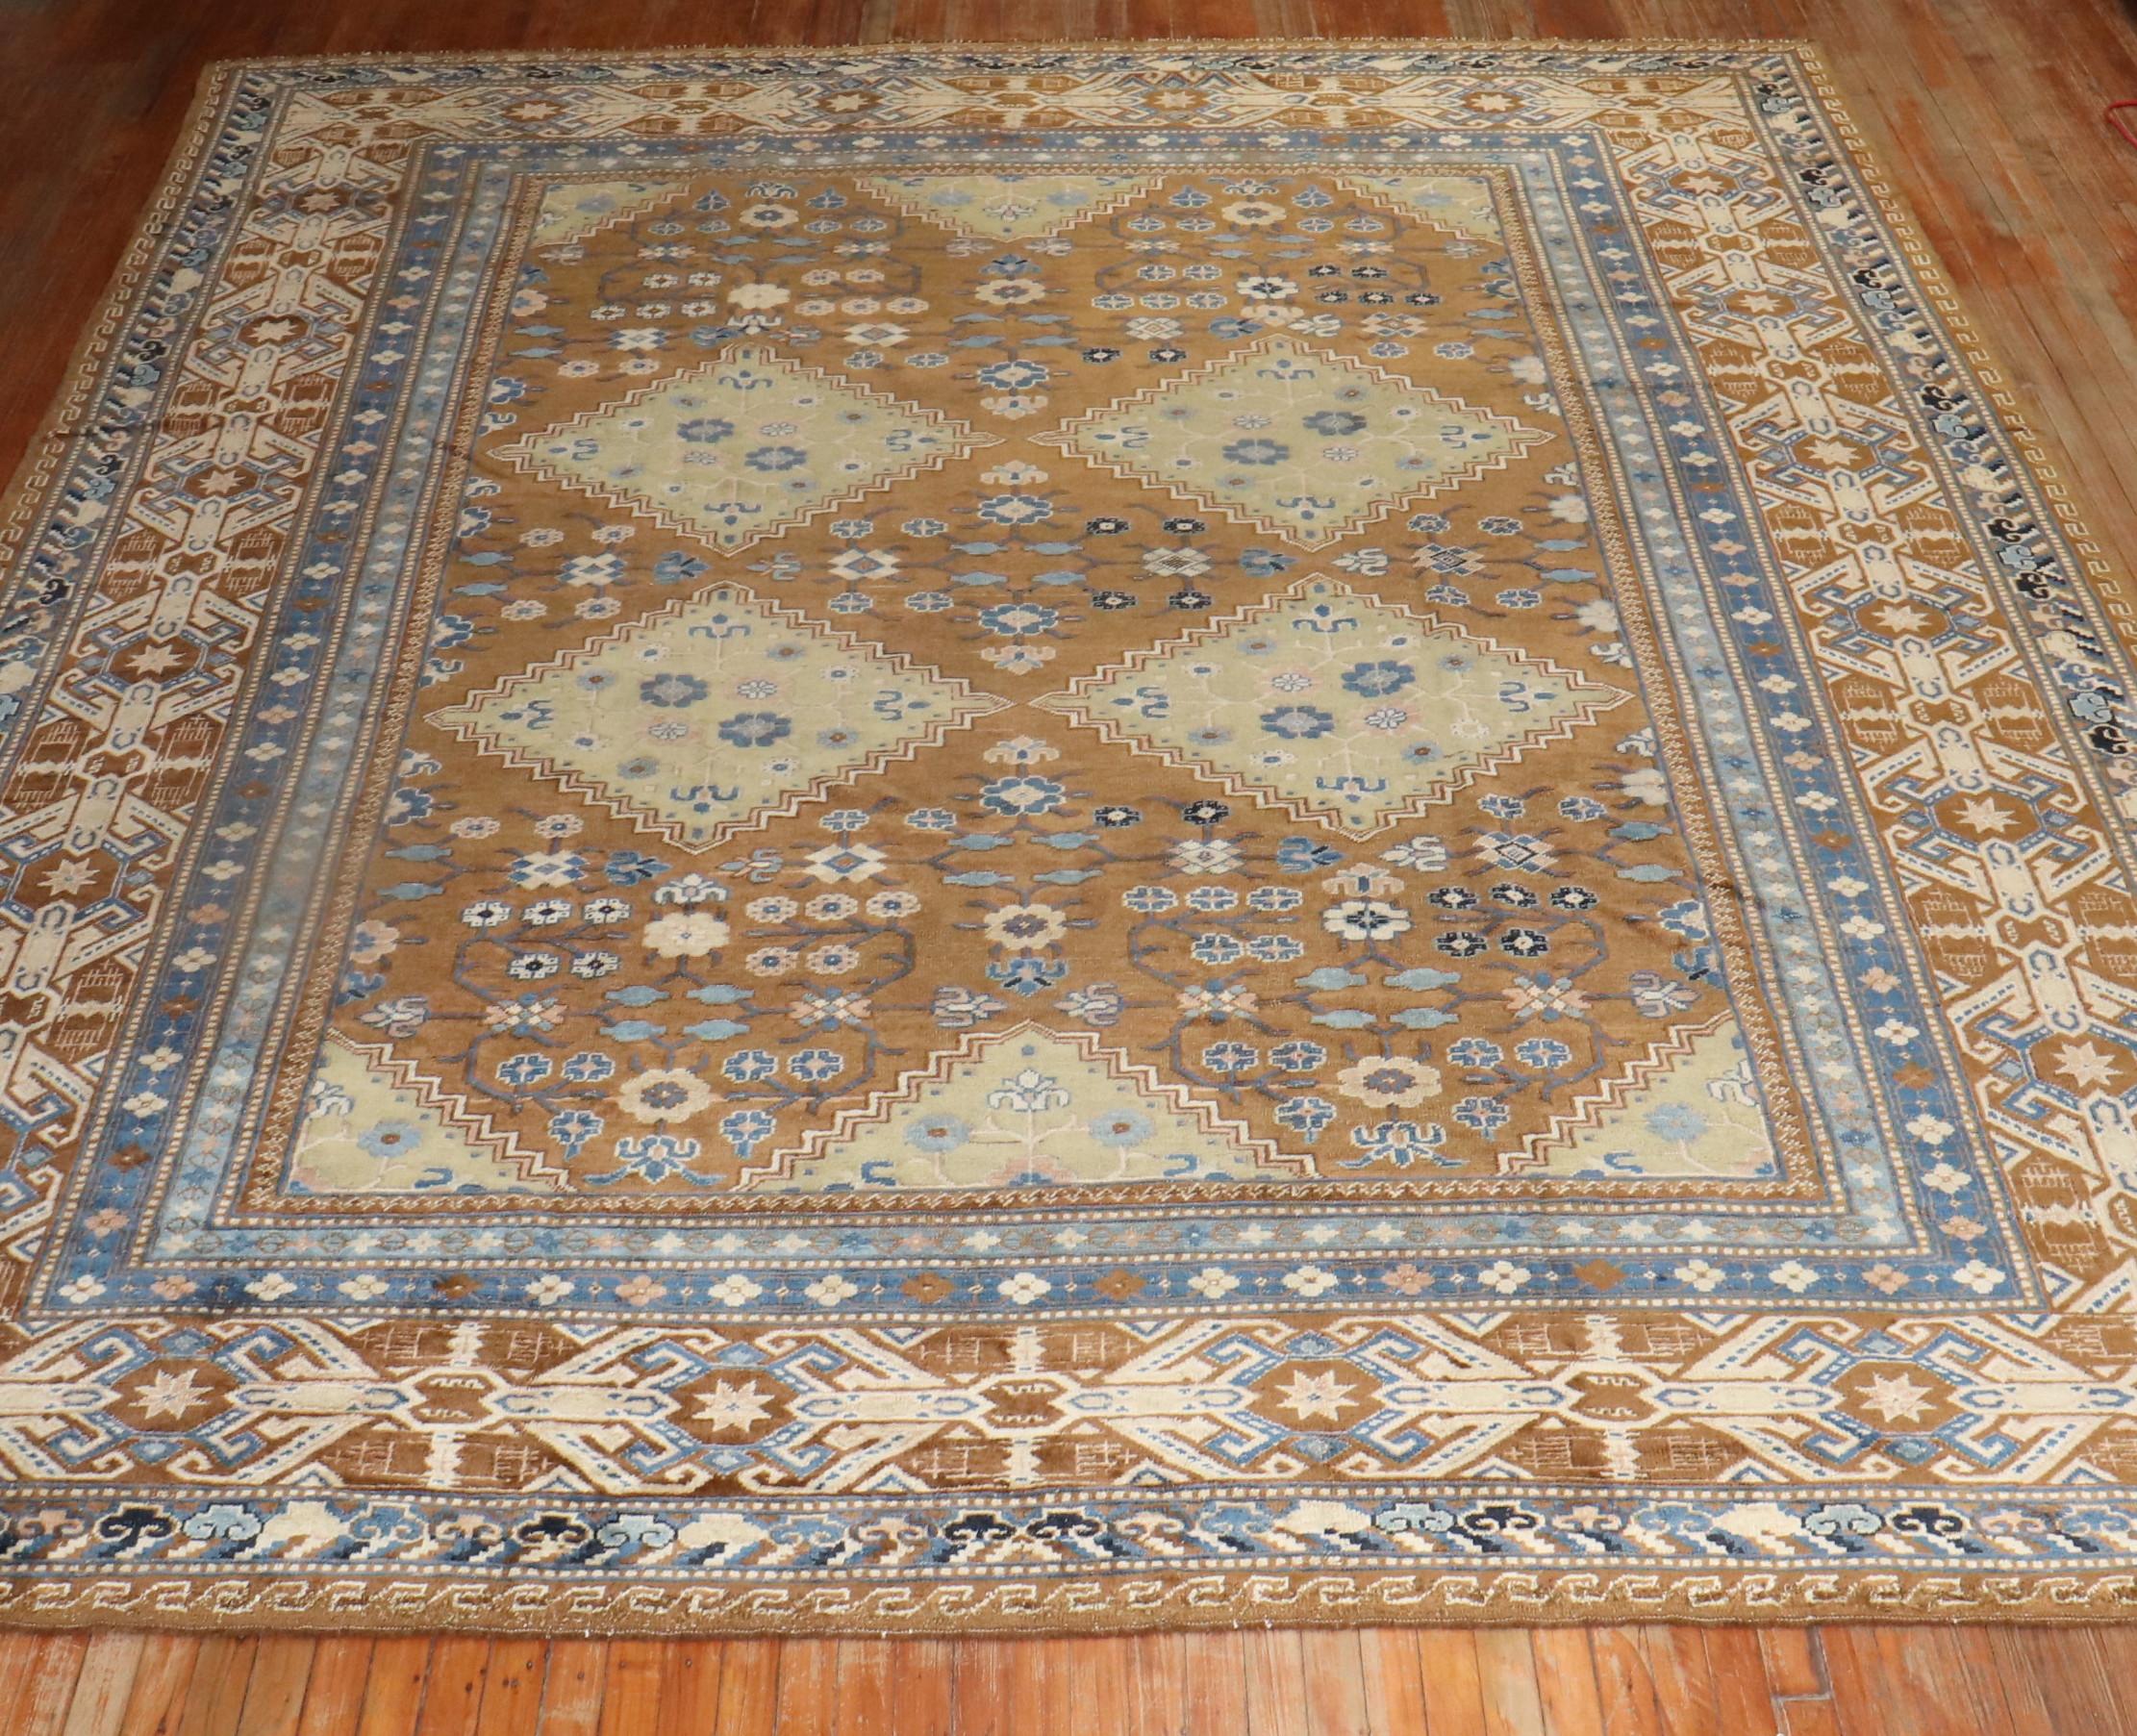 Rare Room size Antique Khotan Rug from the 1st quarter of the 20th Century

Measures: 10'10